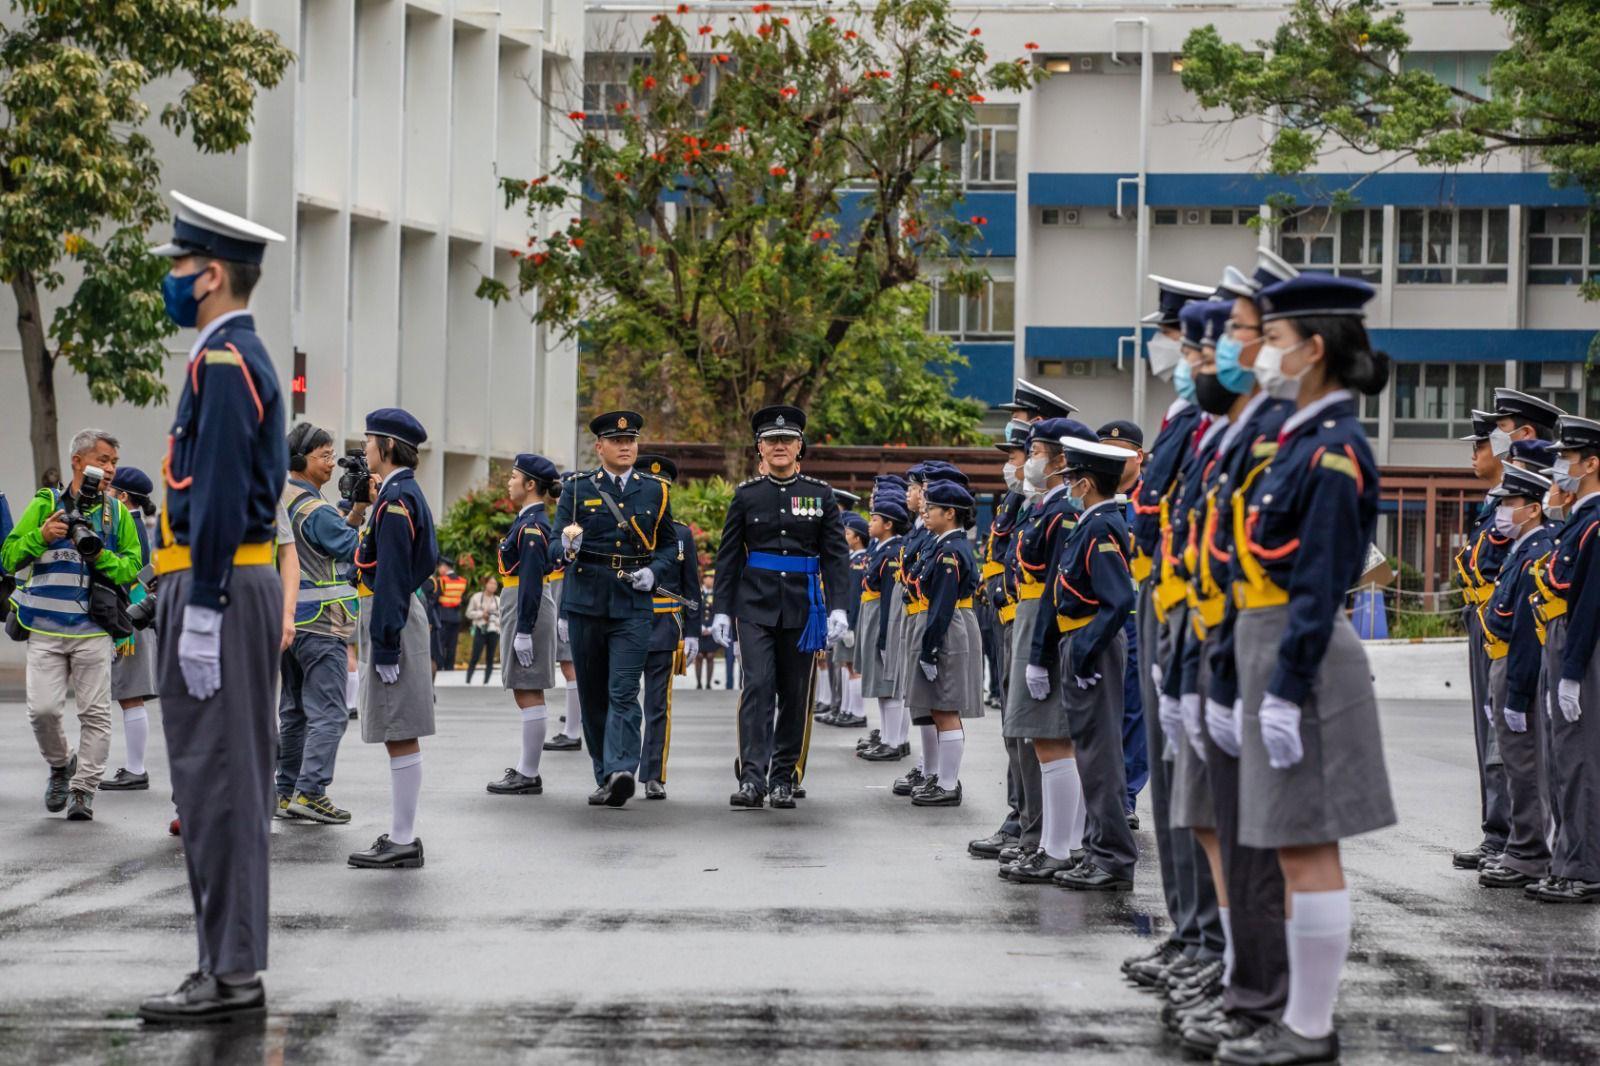 The Commissioner of Police, Mr Siu Chak-yee, inspects the Hong Kong Road Safety Patrol's 60th Anniversary Parade as reviewing officer today (March 26). 